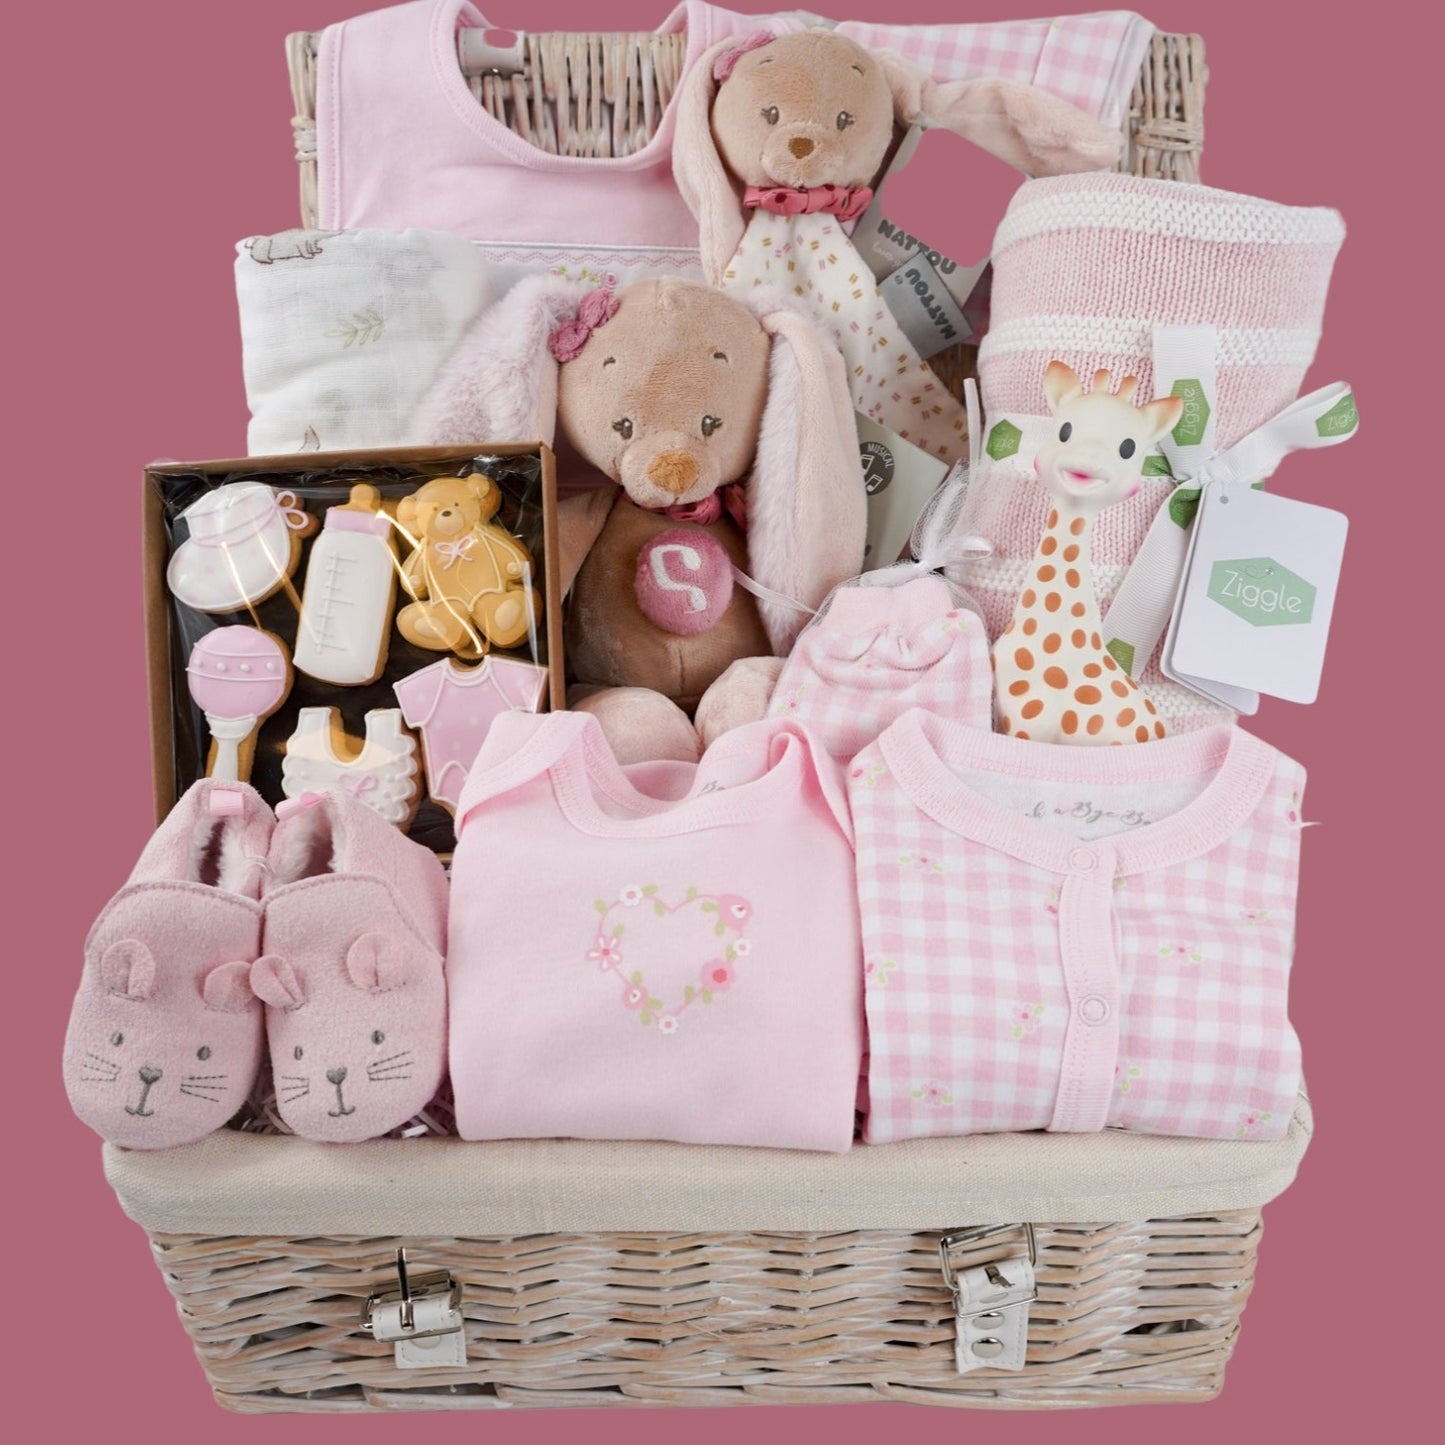 Luxury Baby Girl Hamper Baskets, Nattou Musical Pauline Bunny And Baby Comforter, Baby Gift Biscuits, Corp[orate Baby Hamper